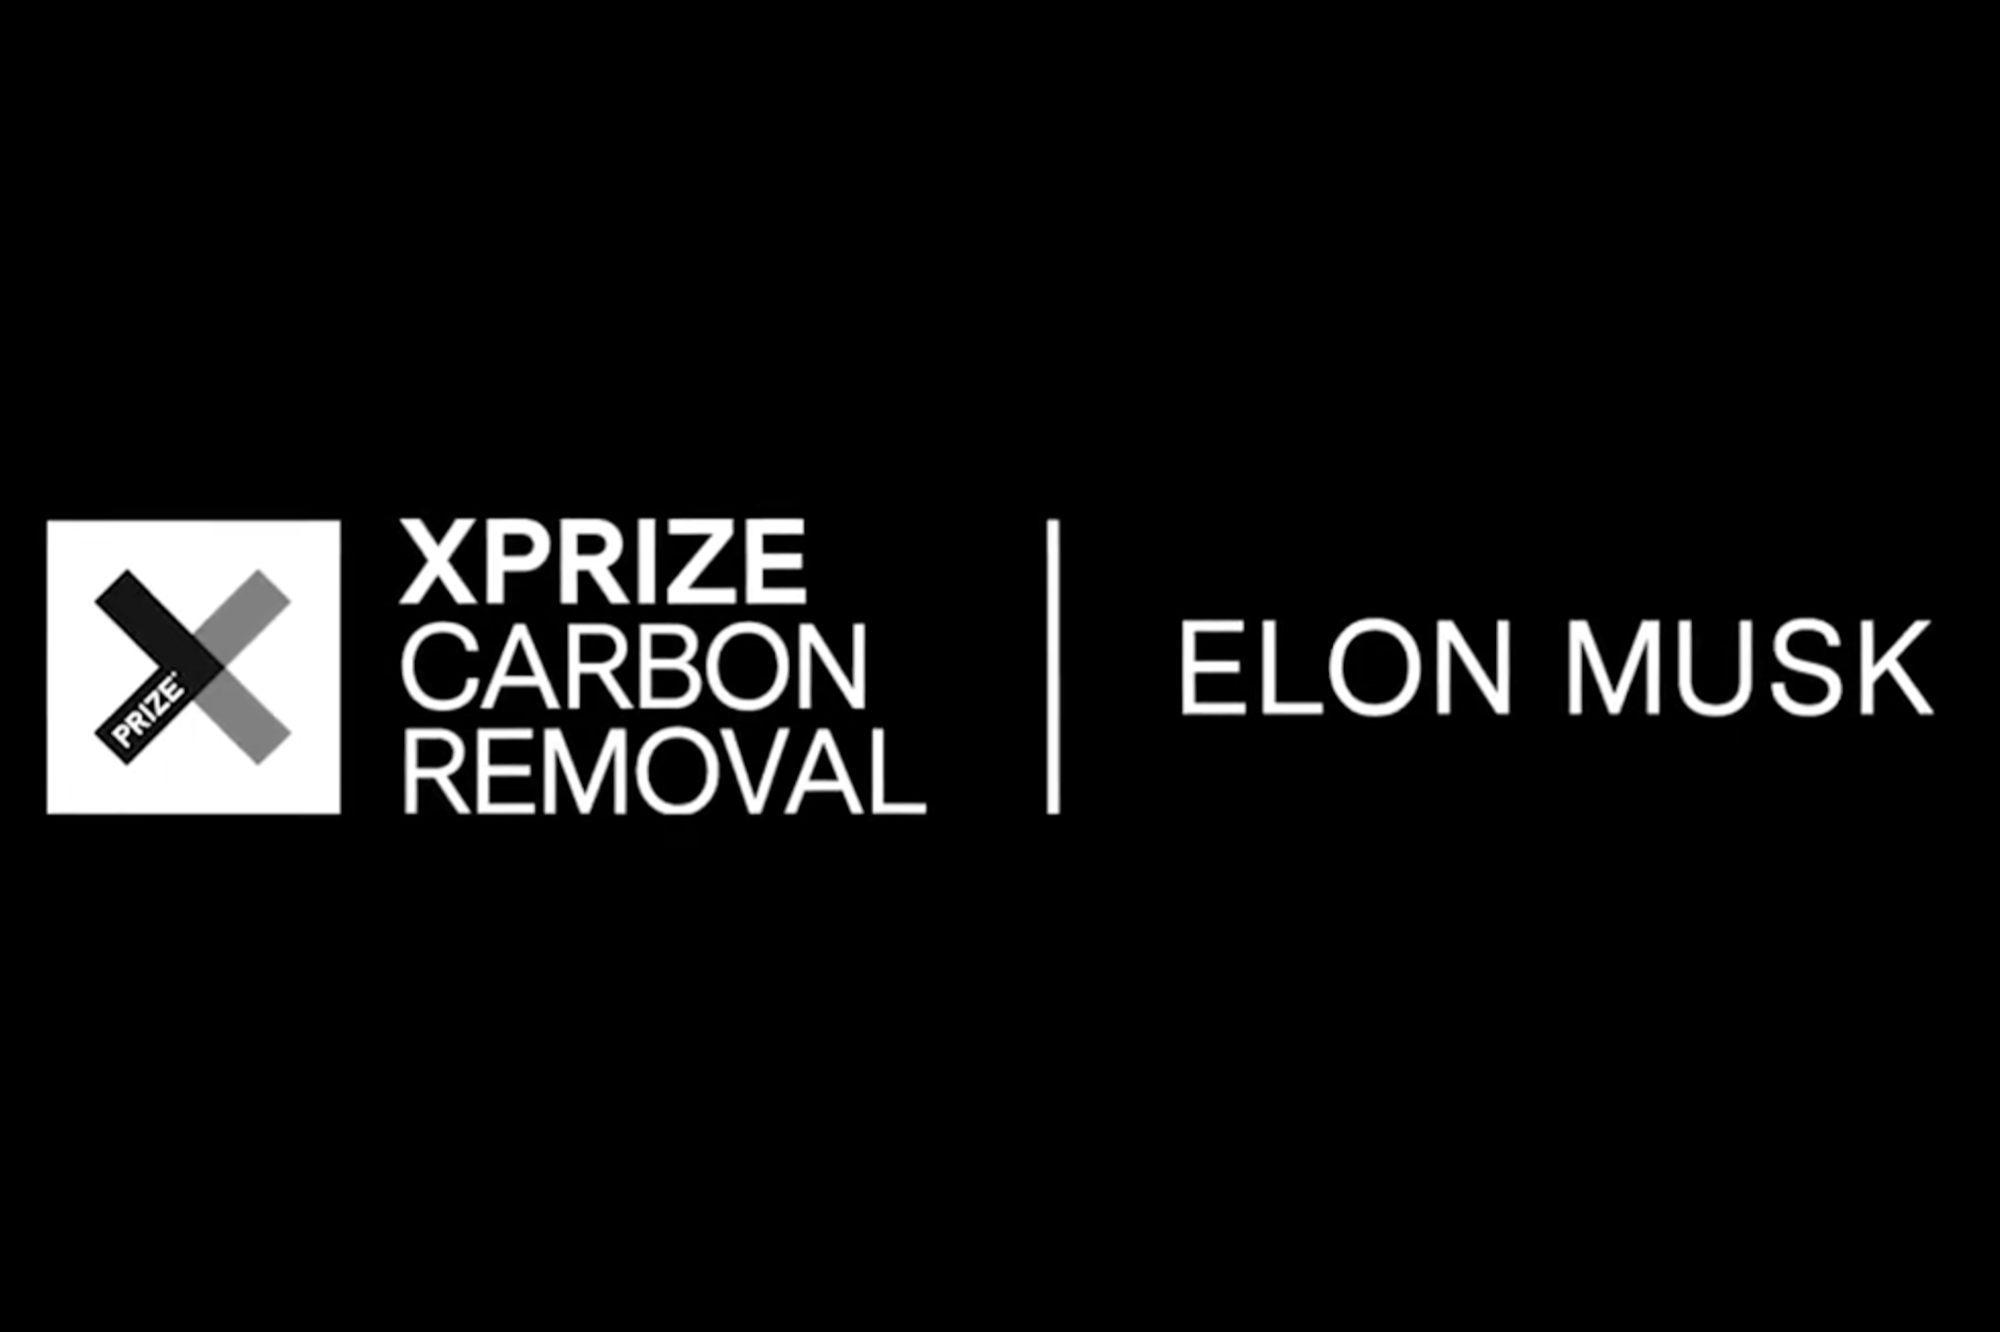 How to Compete for Elon Musk's $100 Million Xprize to Fight Climate Change